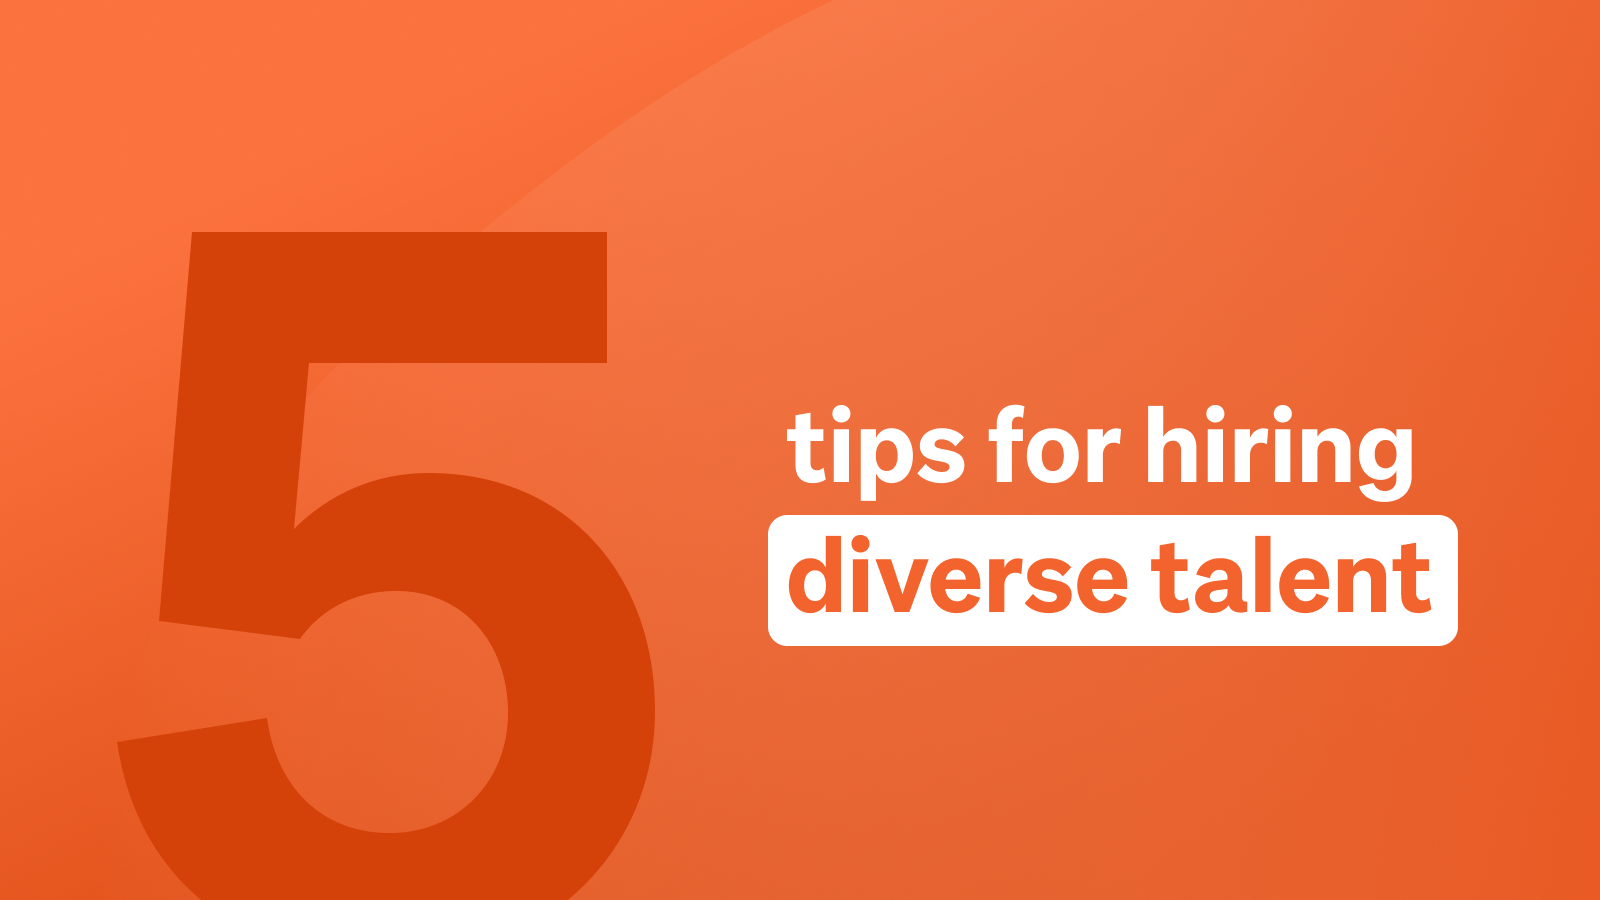 5 tips for hiring diverse talent